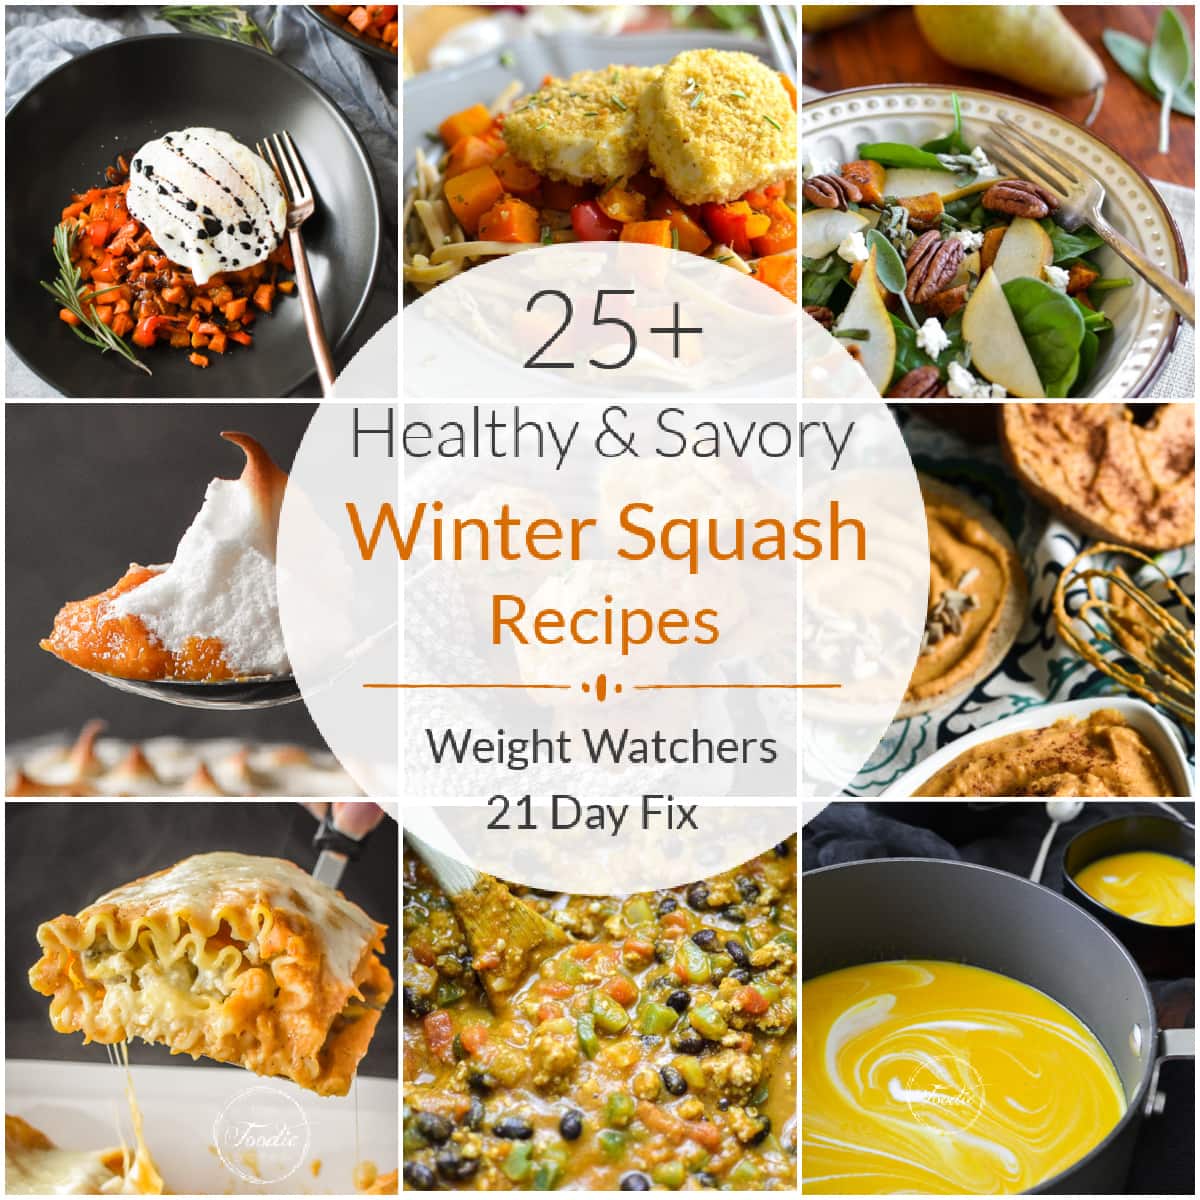 'Tis the season for healthy savory winter squash recipes! Between the butternut, acorn, pumpkin and spaghetti squash recipes, I hope you find new family favorites for the fall and winter! #21dayfix #weightwatchers #ww #mealprep #healthy #winter #healthydinners #squash #pumpkin #butternutsquash #acornsquash